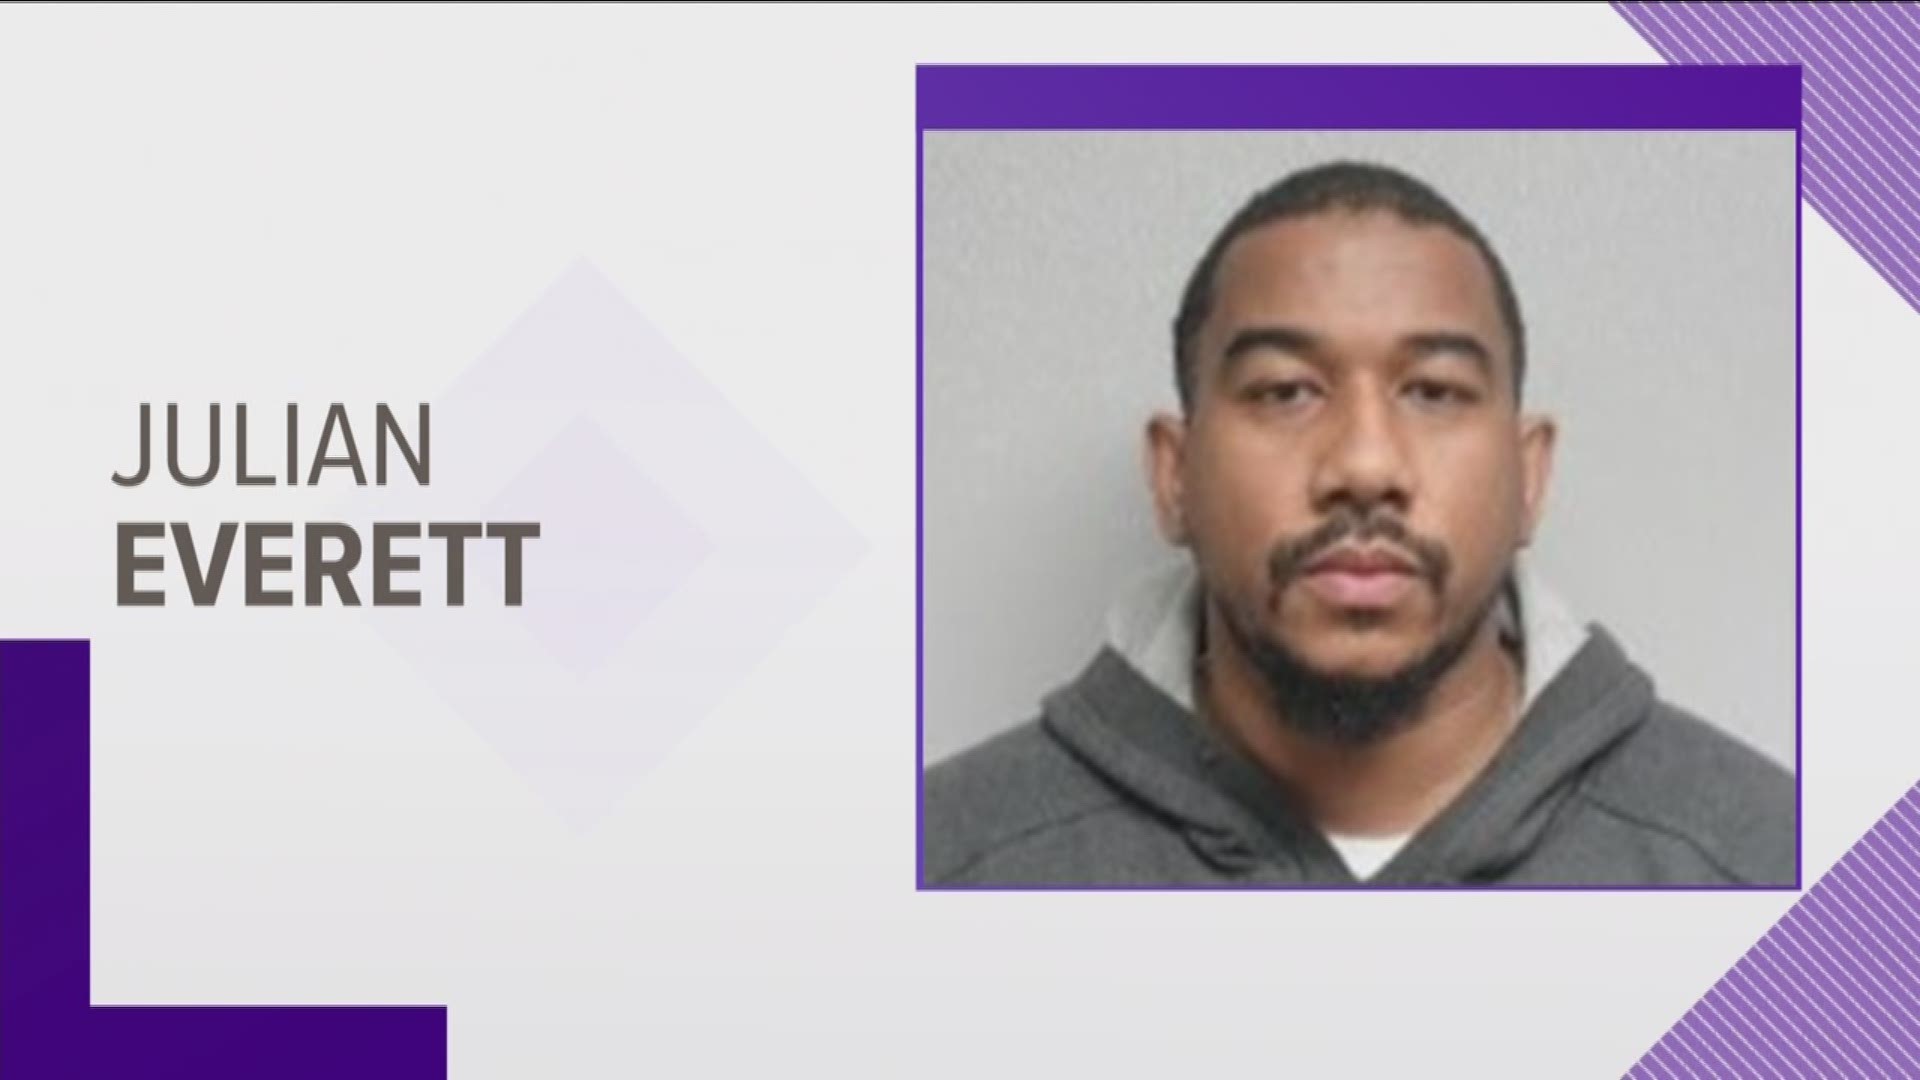 35-year-old Julian Everett of New Carrollton is currently under arrest. Police have charged him in connection with three sexual assaults.